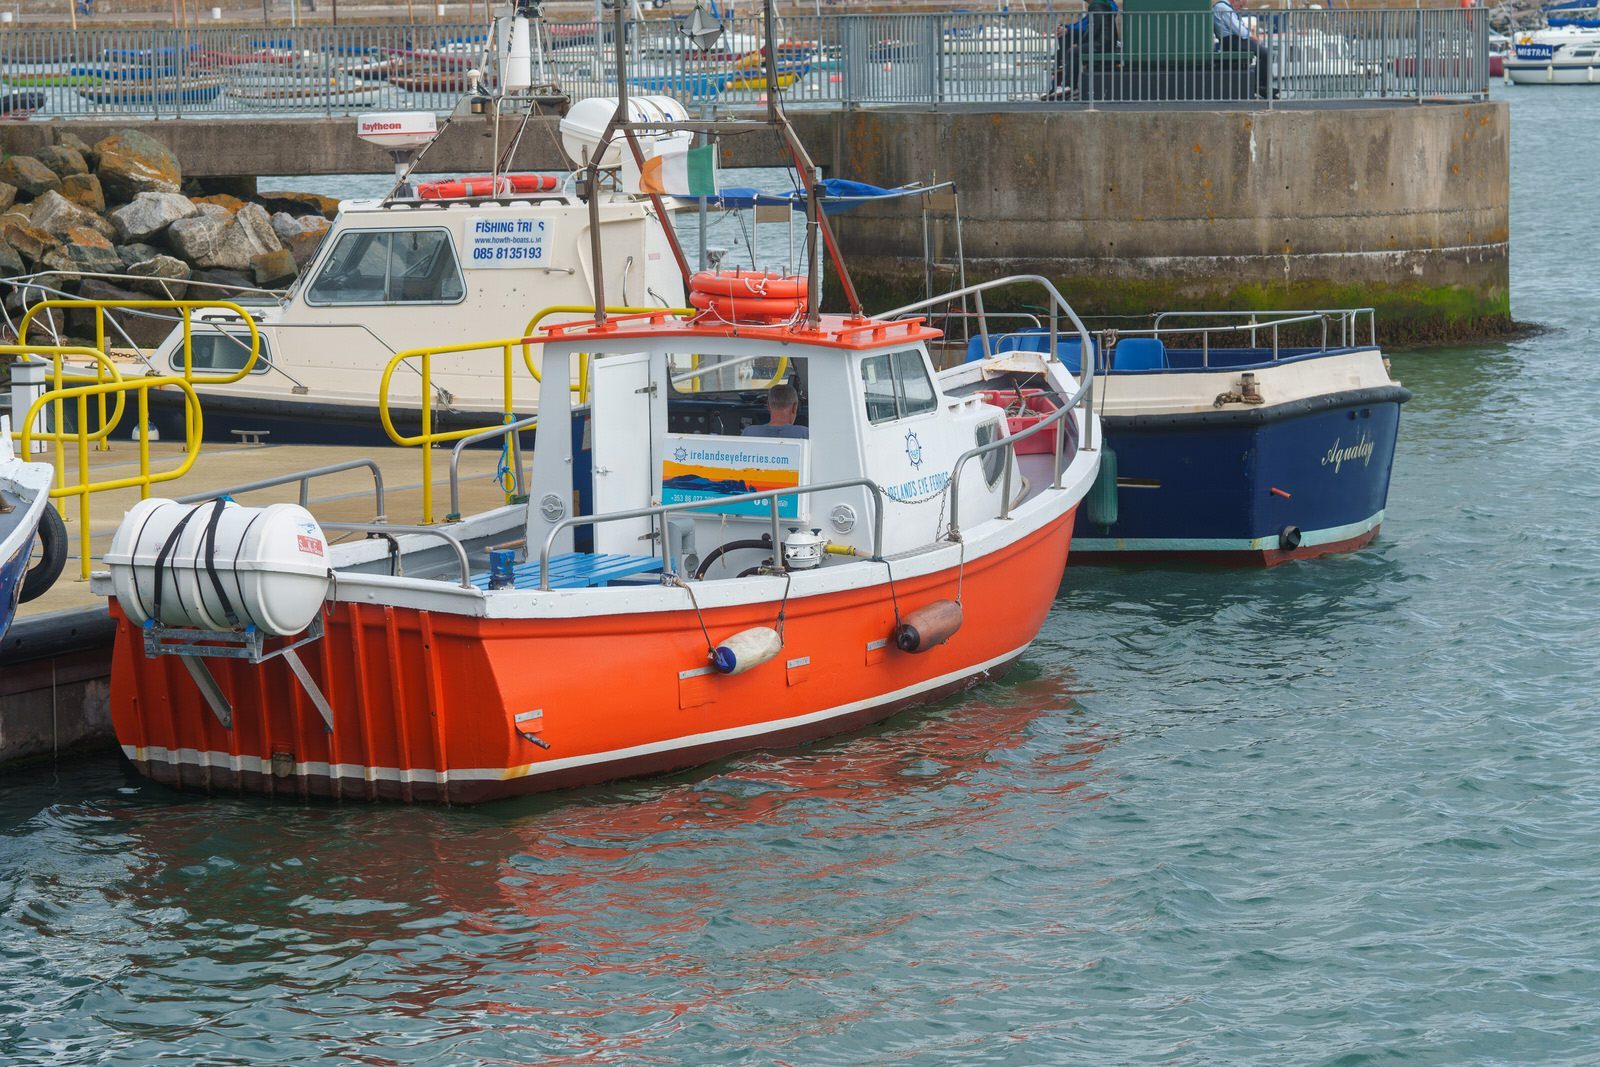 BOATS AND PEOPLE ON A SUNNY DAY [THE FISHING VILLAGE OF HOWTH]-221455-1